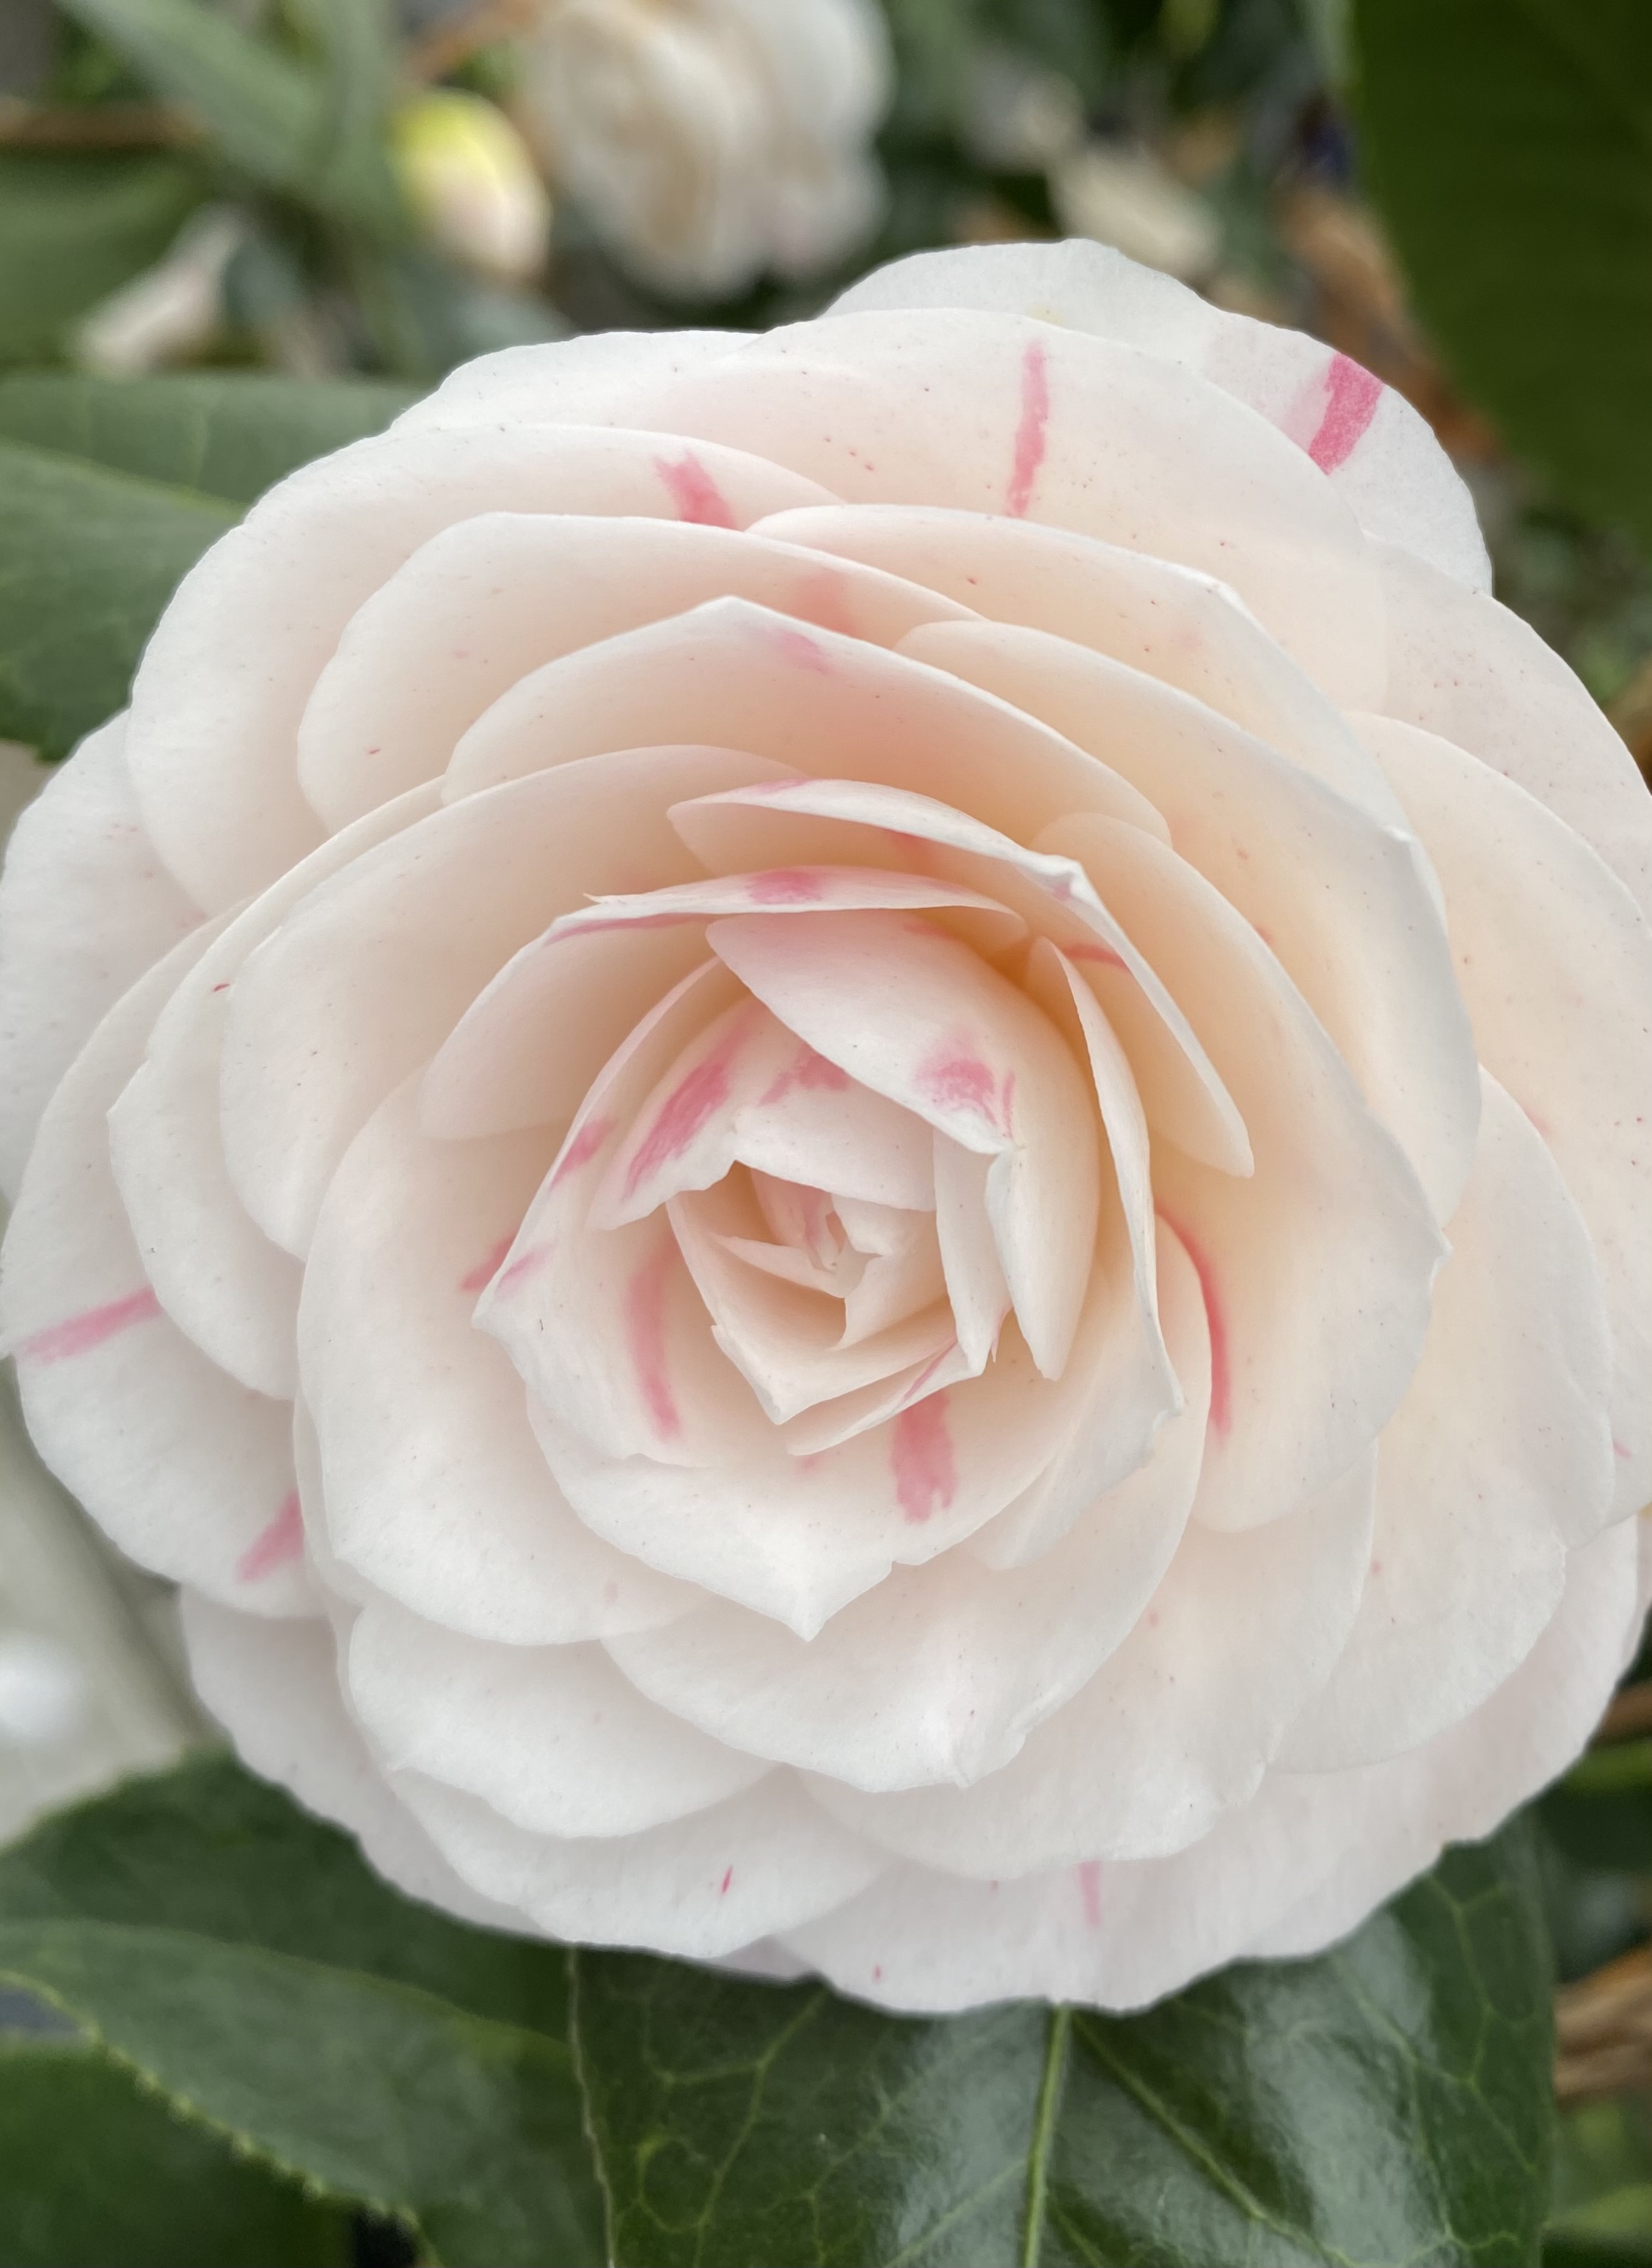 This camellia is mostly white with pink stripes.